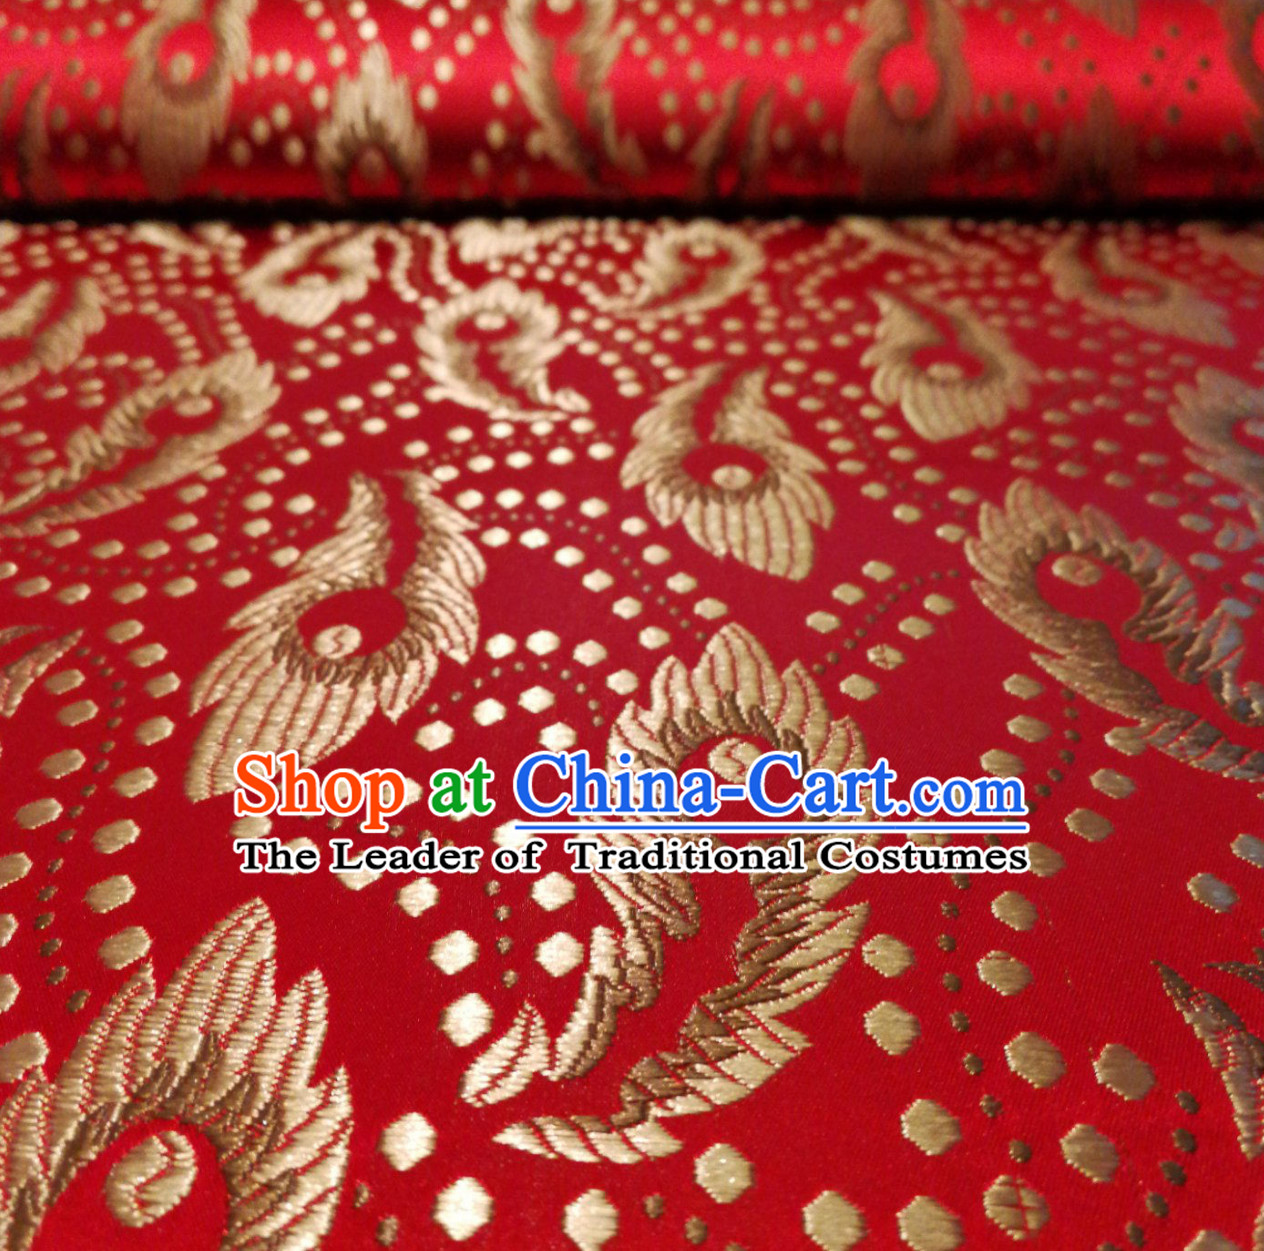 Royal Red Color Chinese Royal Palace Style Traditional Pattern Design Brocade Fabric Silk Fabric Chinese Fabric Asian Material